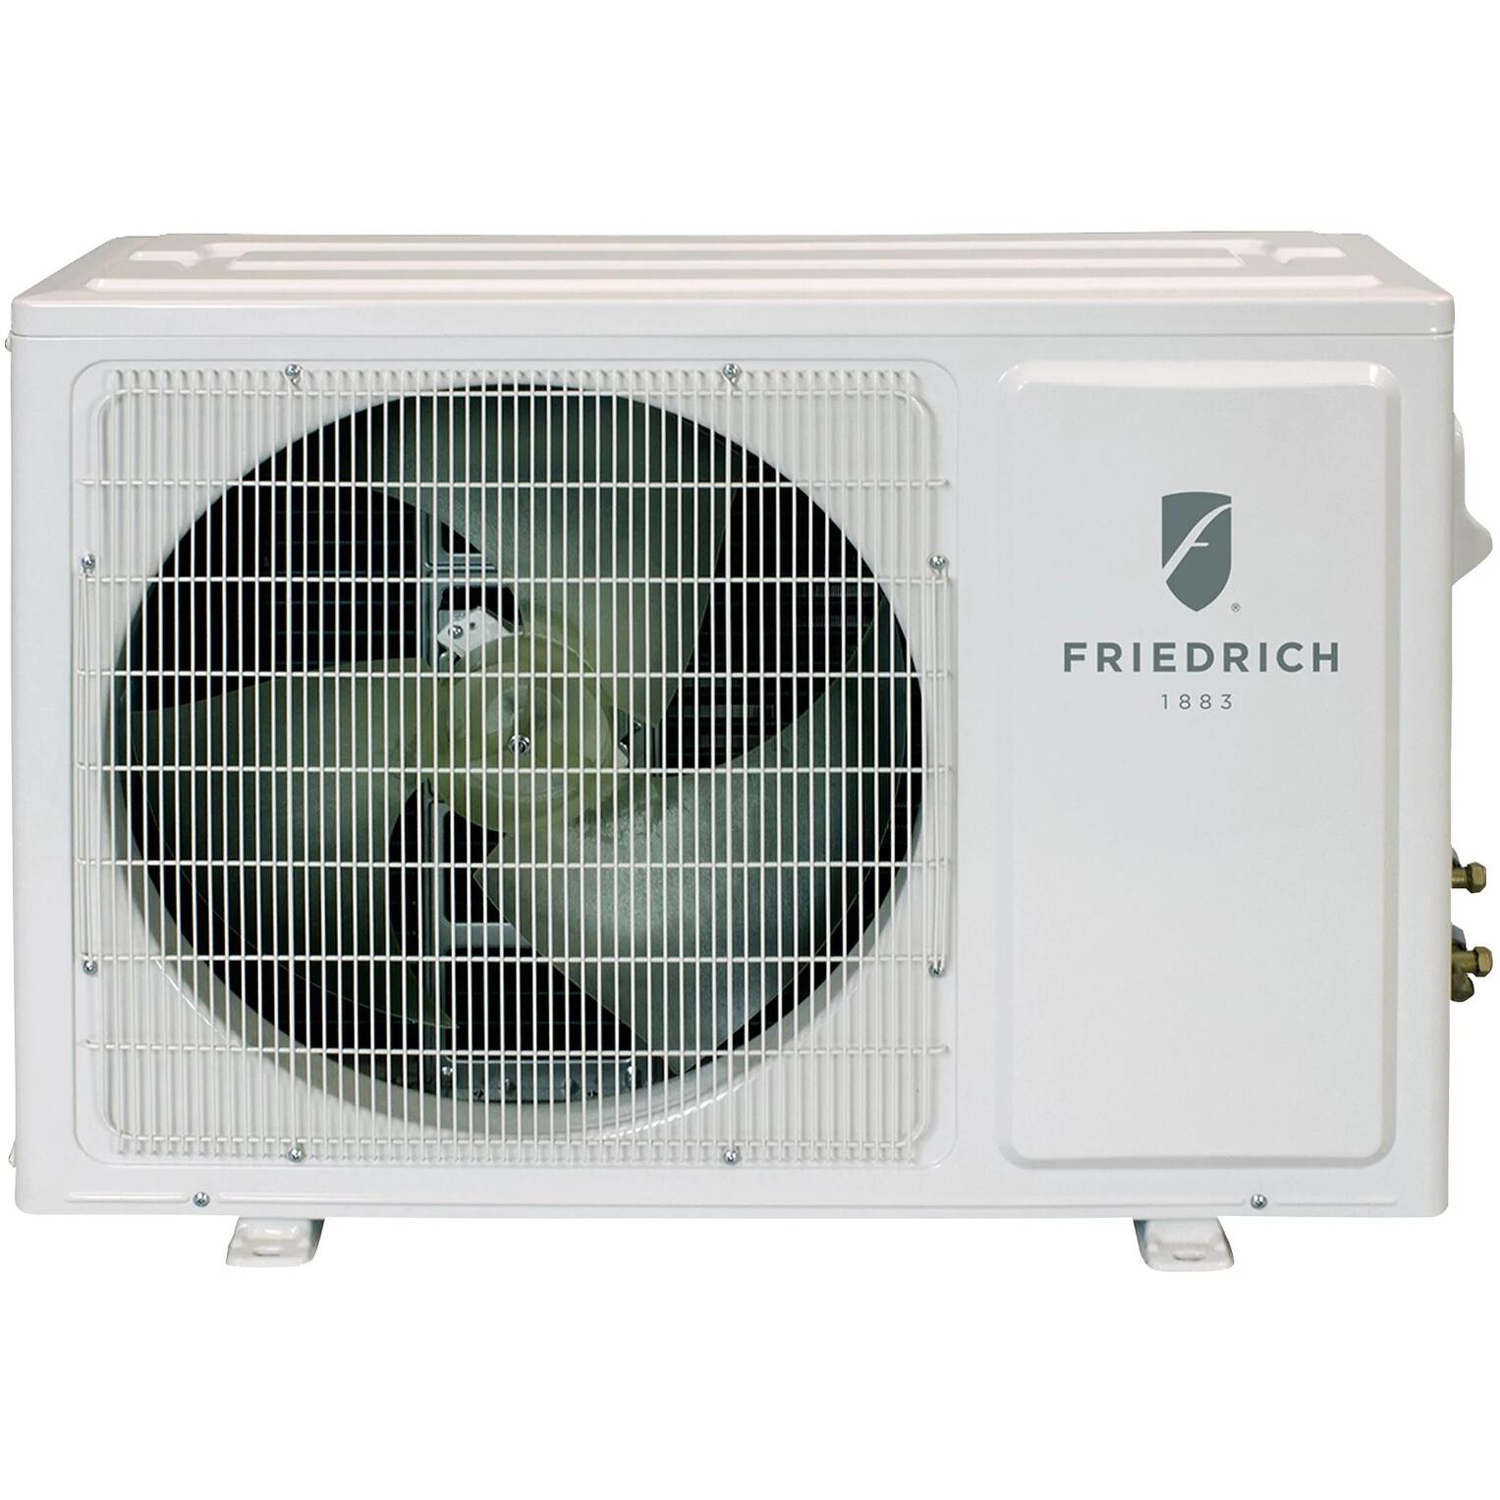 Photos - Other large household technique Friedrich Floating Air Select Outdoor 12000 BTU Air Conditioner and Heater 